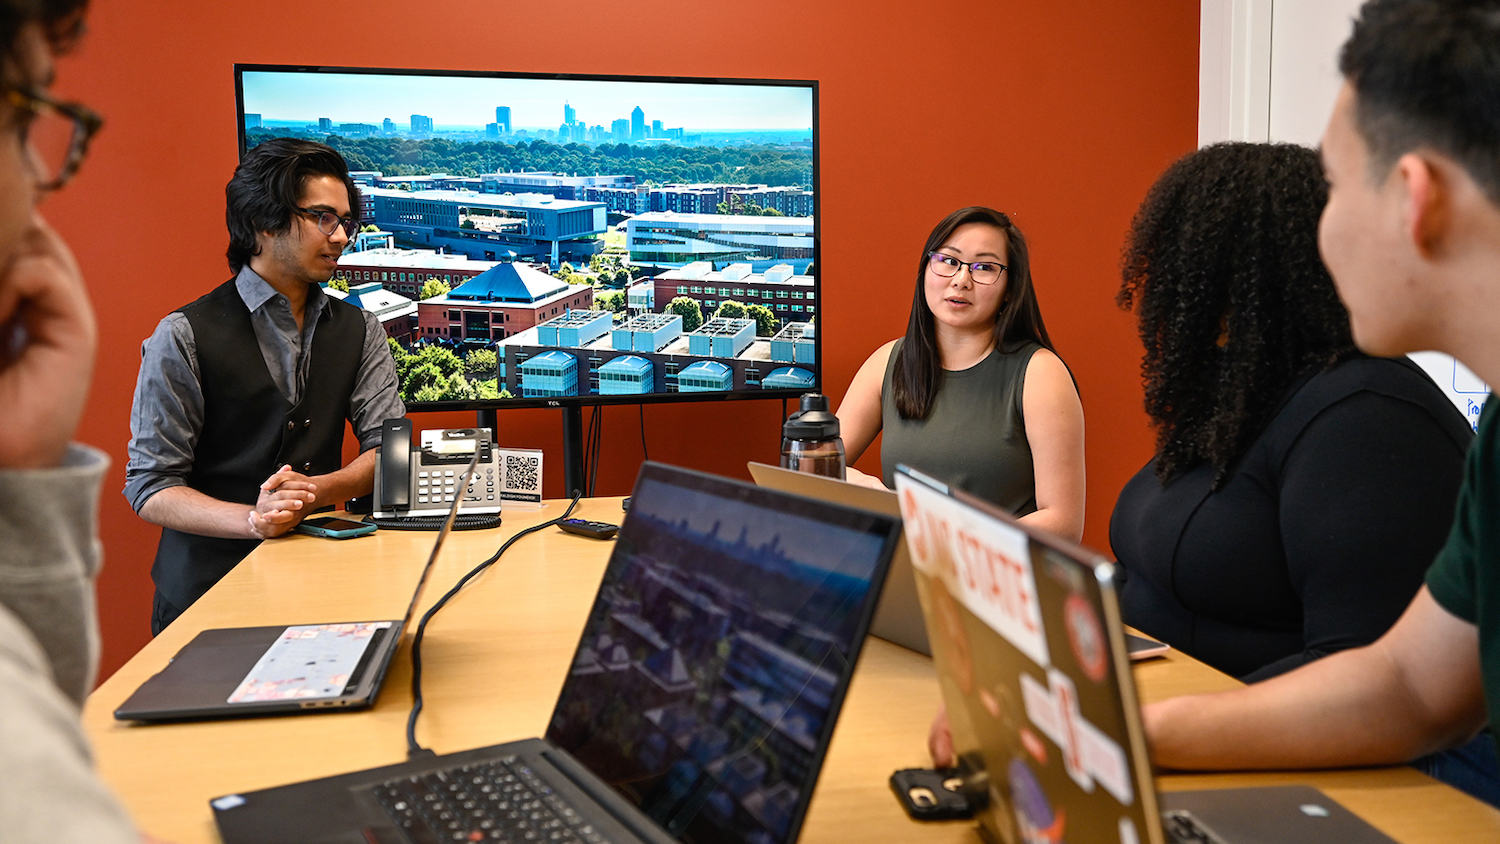 Students work in the Entrepreneurship Clinic (Garage, E-clinic) on Centennial Campus. - New Program Aims to Grow Tomorrow's Leaders - College of Natural Resources News NC State University